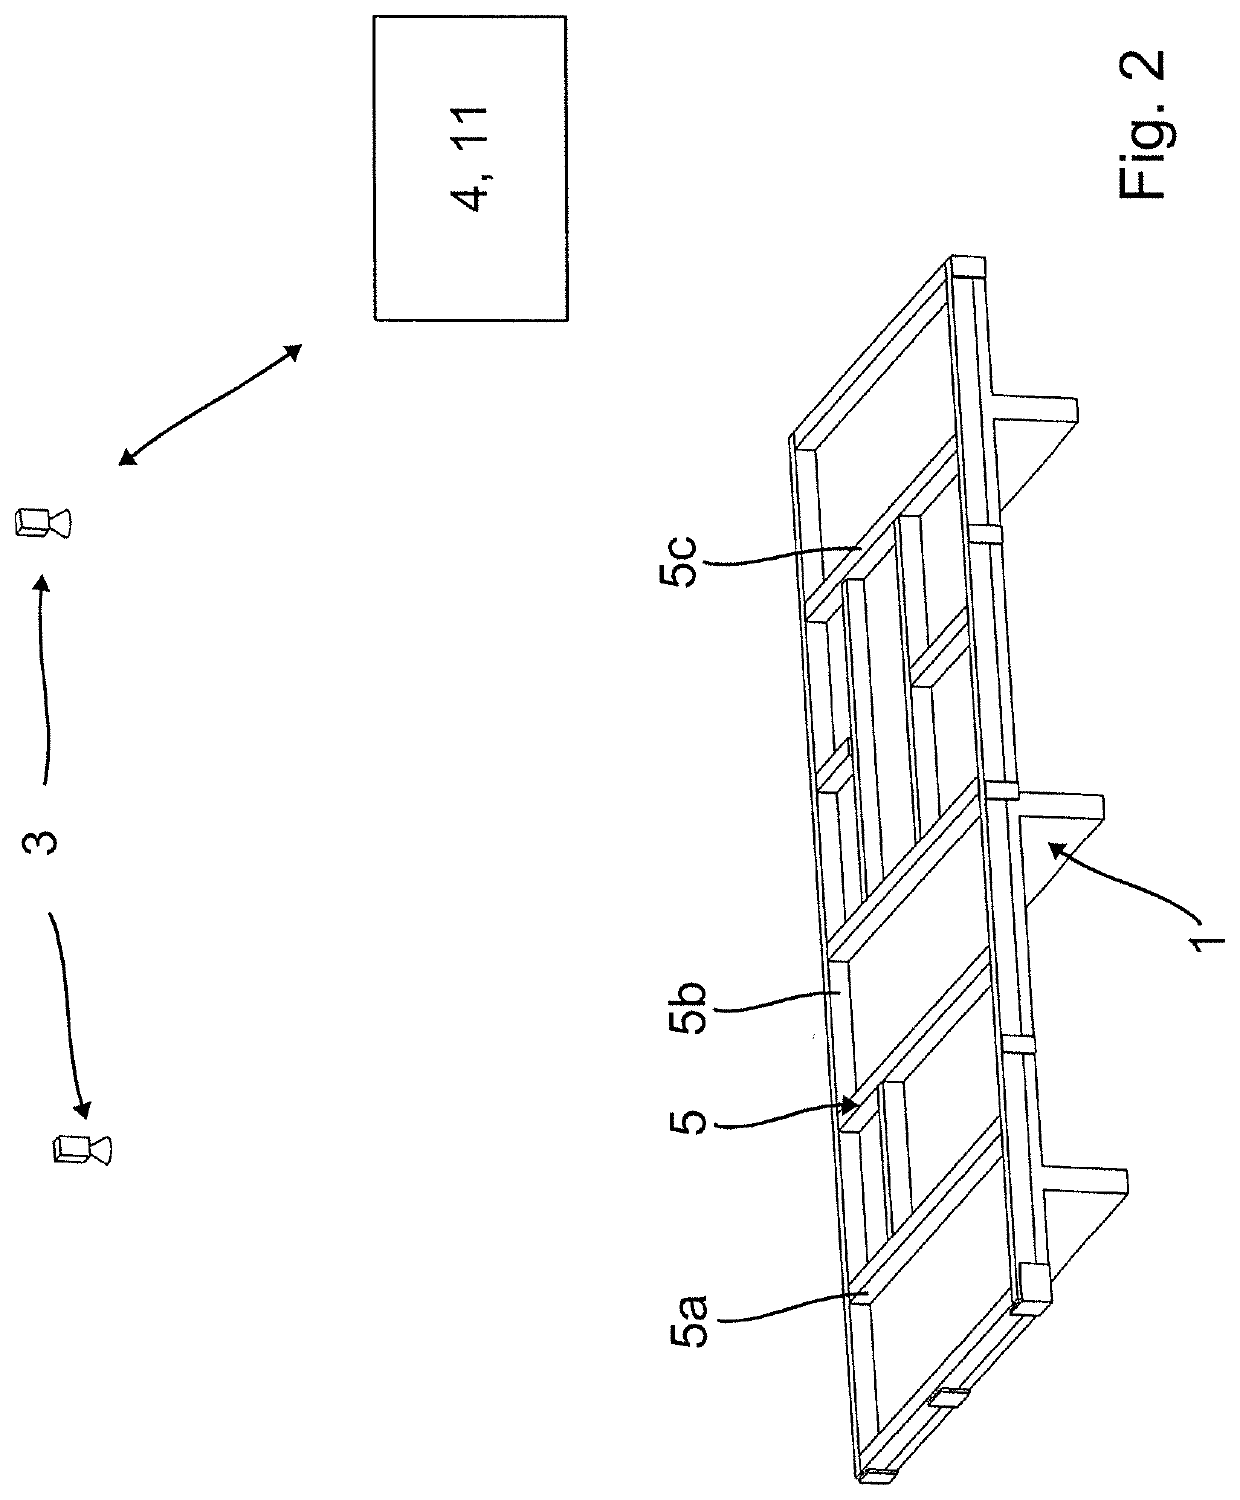 Process for manufacturing wall elements from nailable and/or stapleable materials